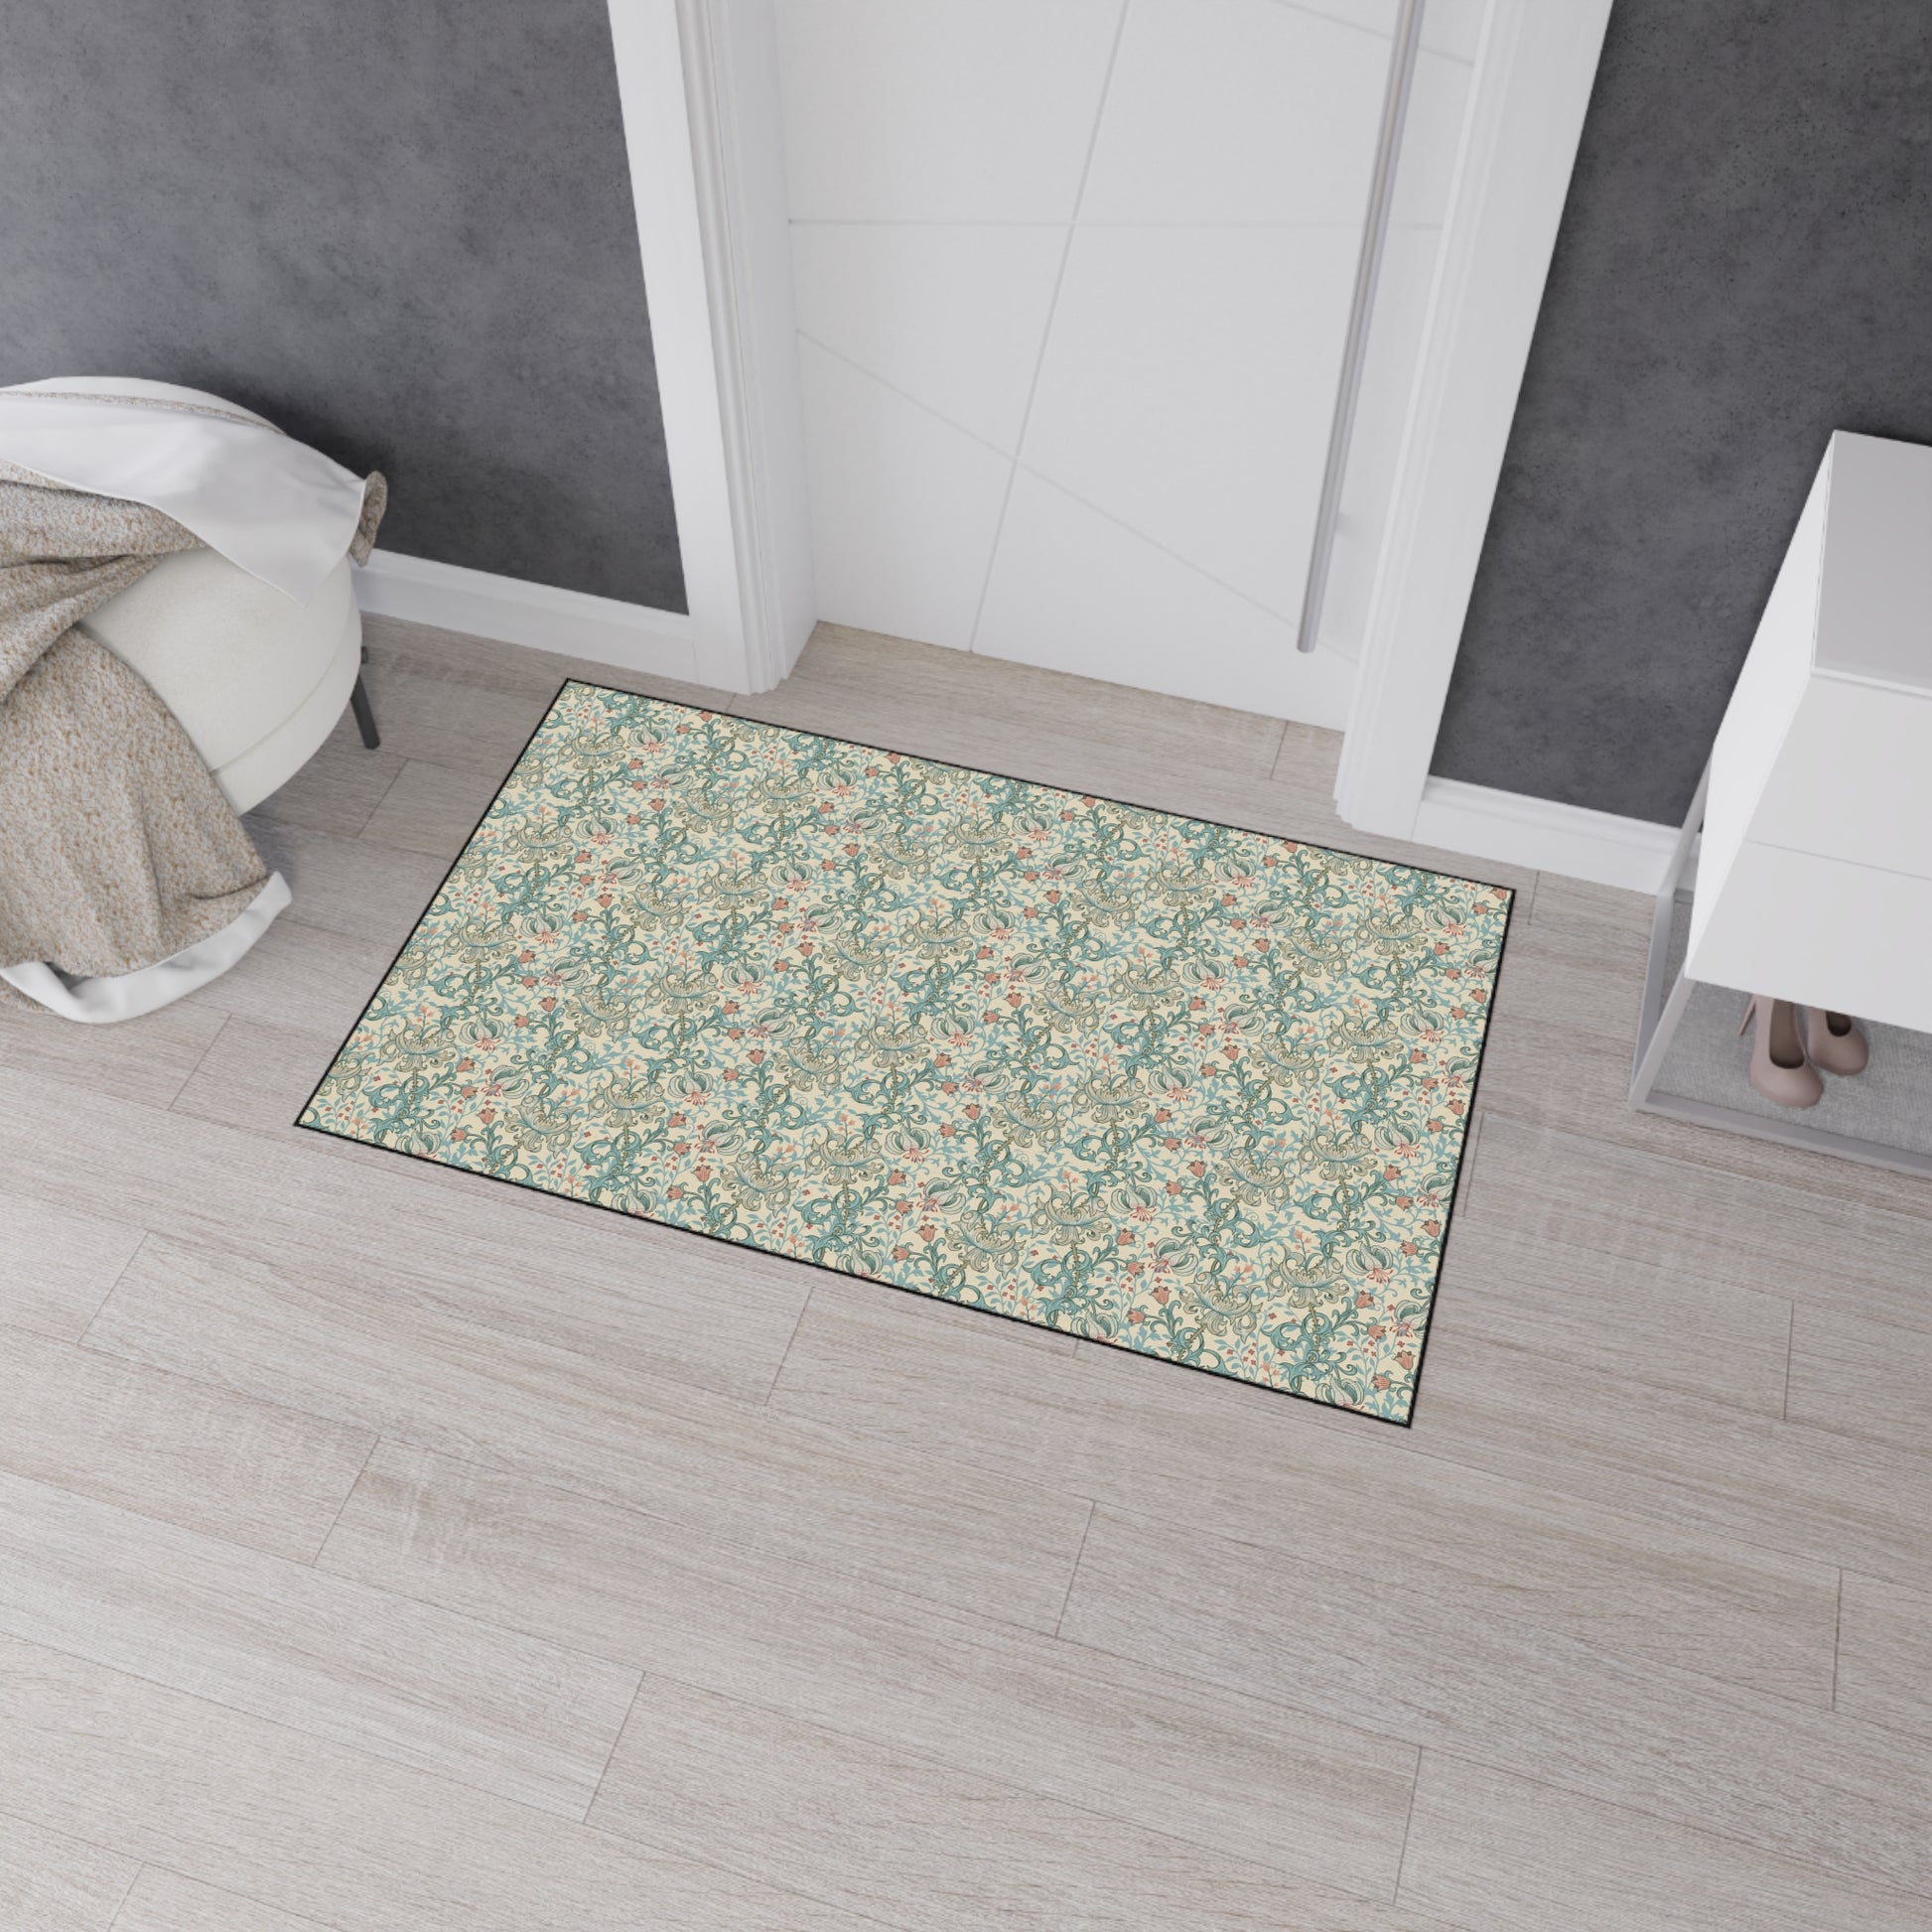 william-morris-co-heavy-duty-floor-mat-golden-lily-collection-mineral-17